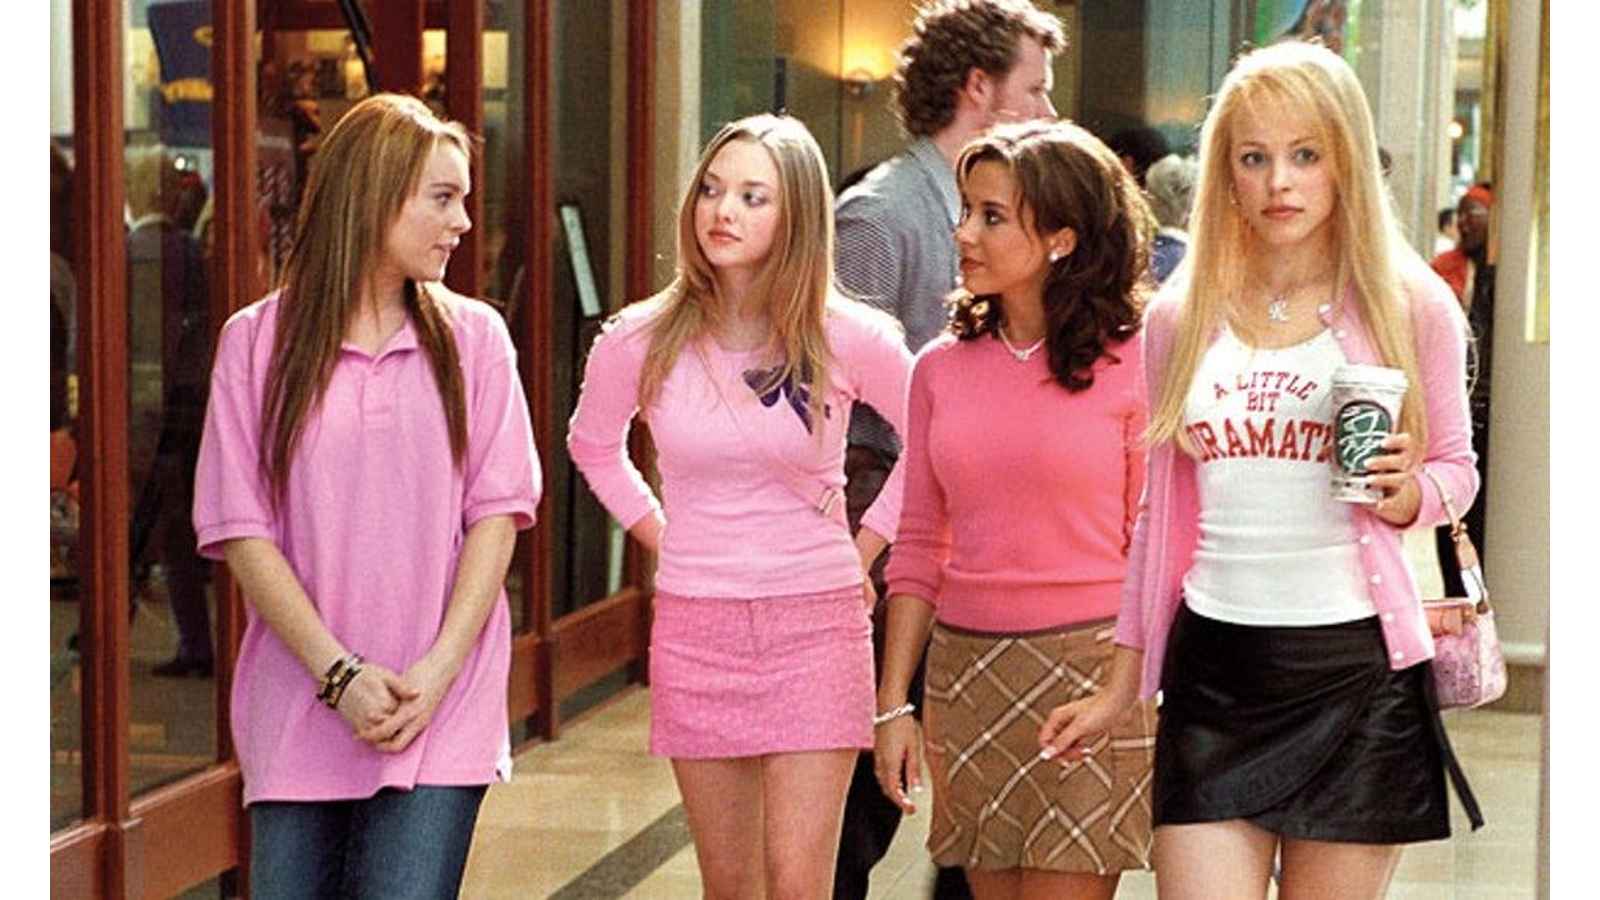 Mean Girls Day 2023: Date, History, Facts, Activities